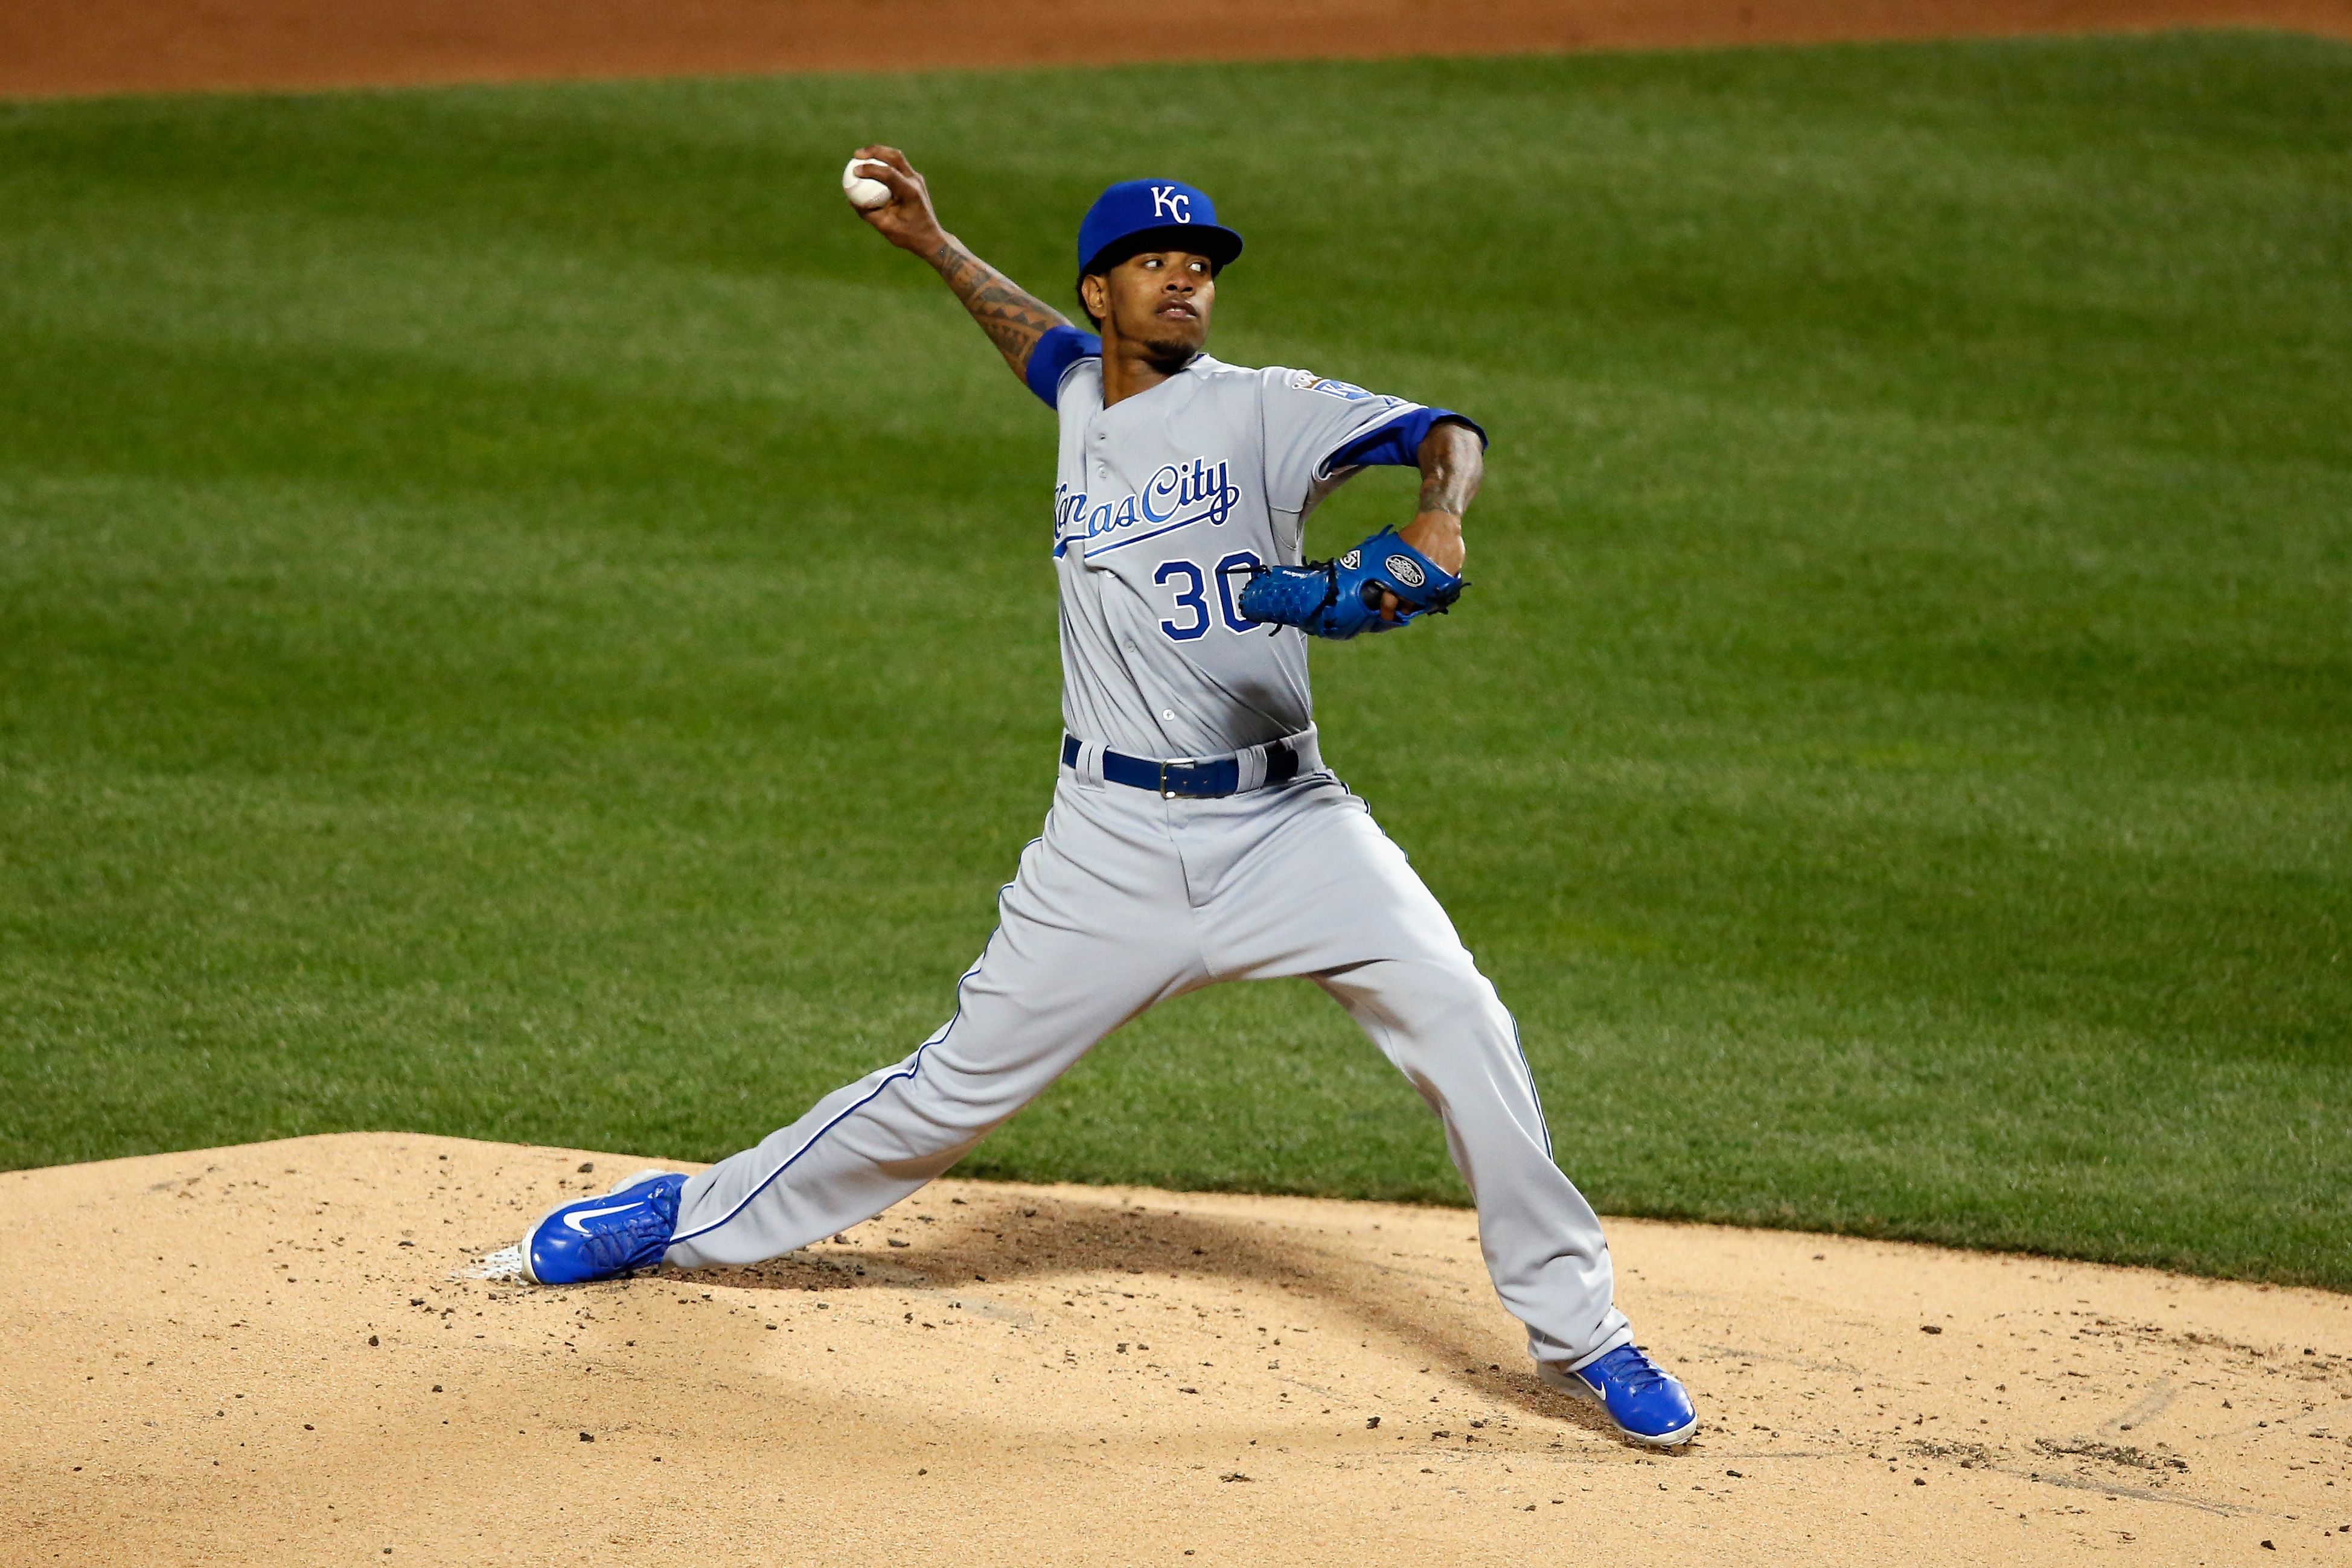 Royals Pitcher Yordano Ventura Was Killed in a Car Accident